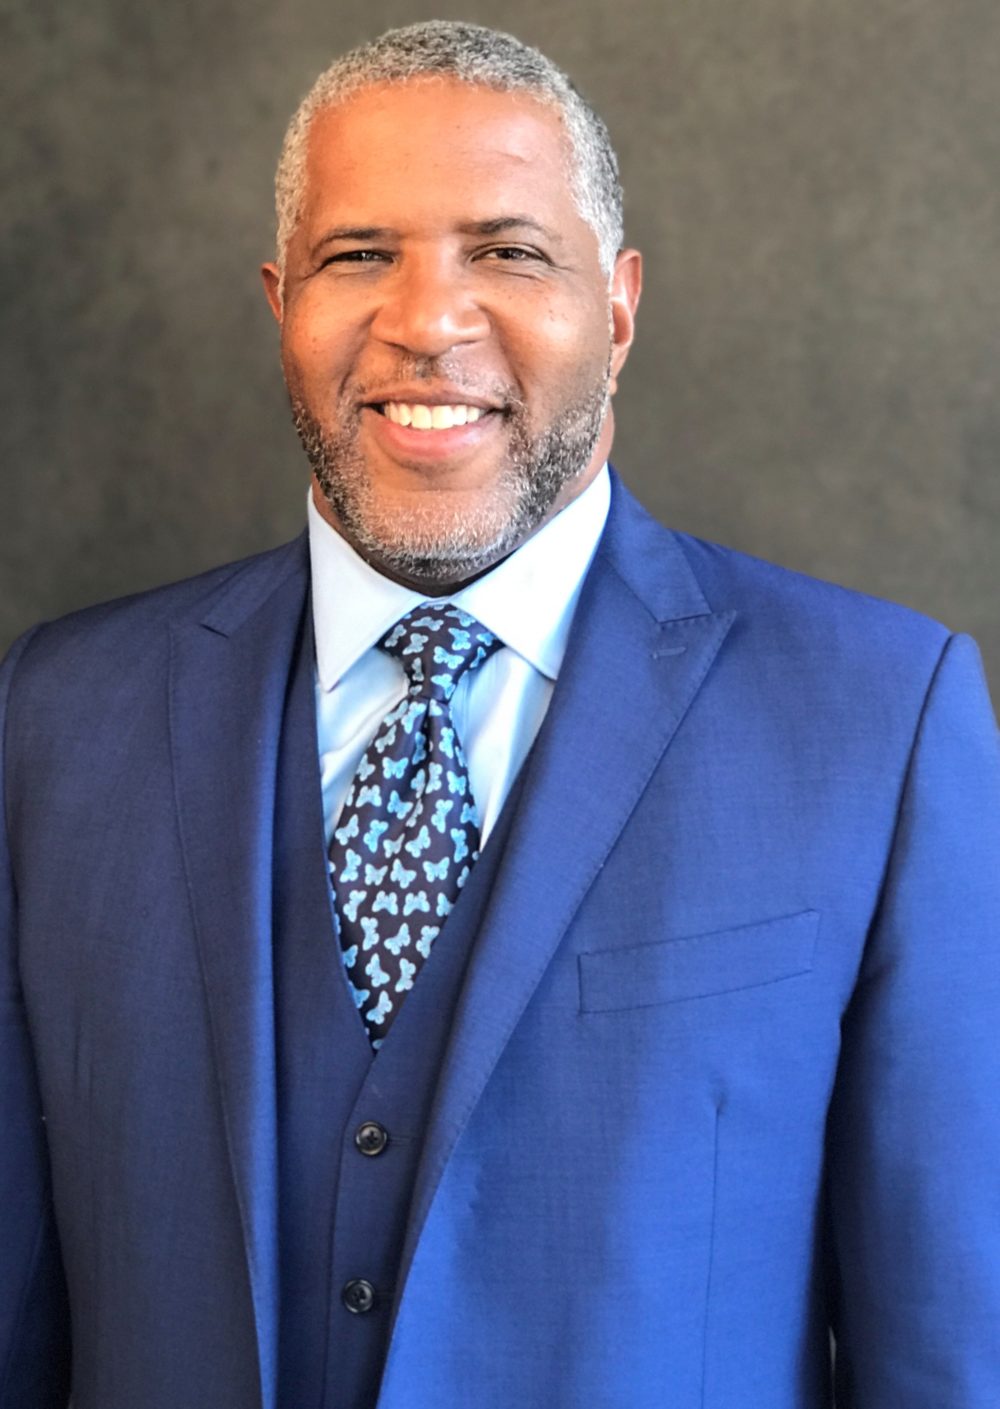 Robert F. Smith, Founder, Chairman & CEO, Vista Equity Partners